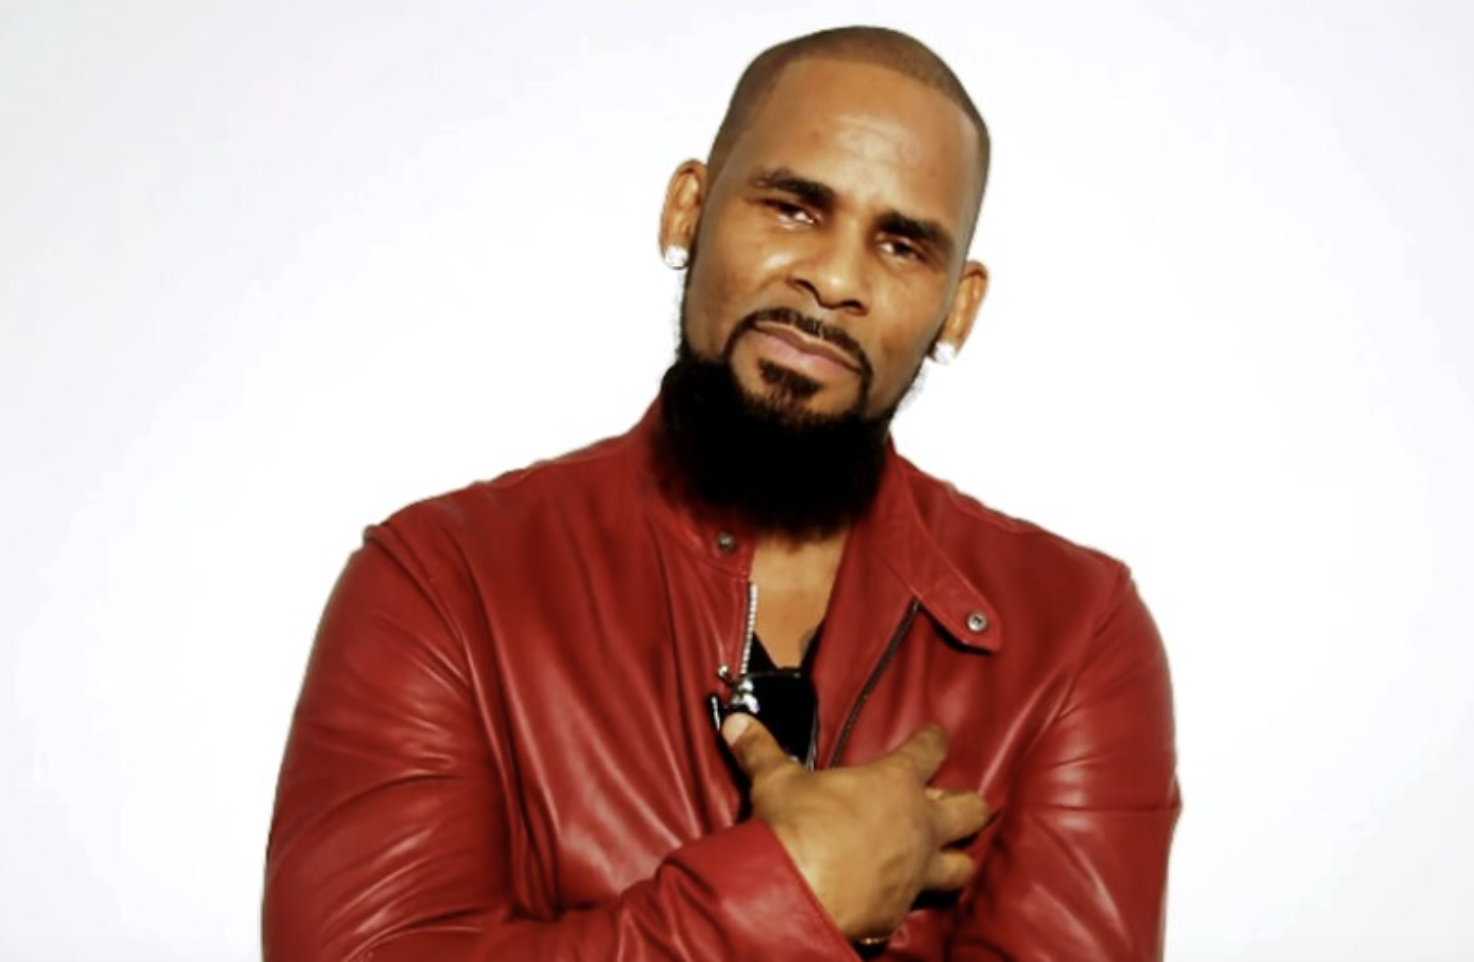 The Recording Academy Is In No Rush To Take Away R. Kelly’s Grammy Awards